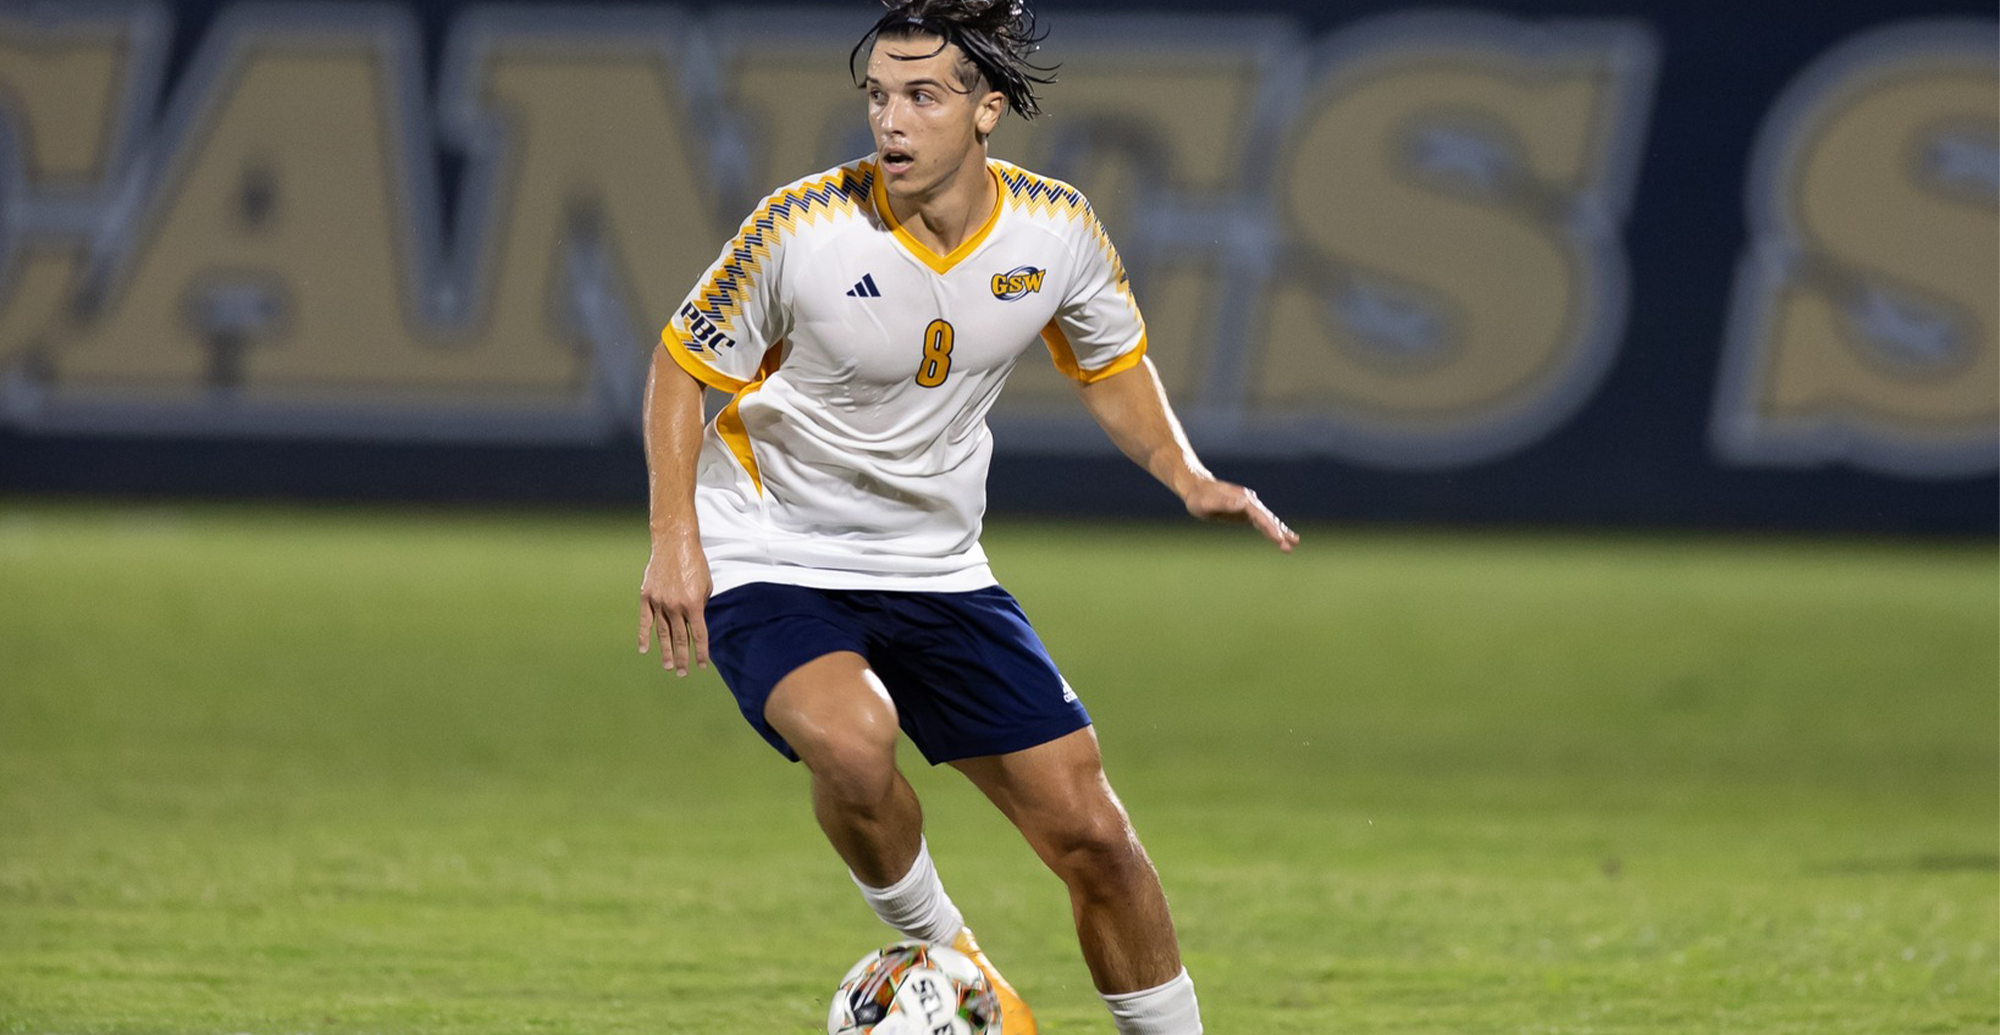 Unable To Solve The Embry-Riddle; Canes Fall 2-0 To The Eagles